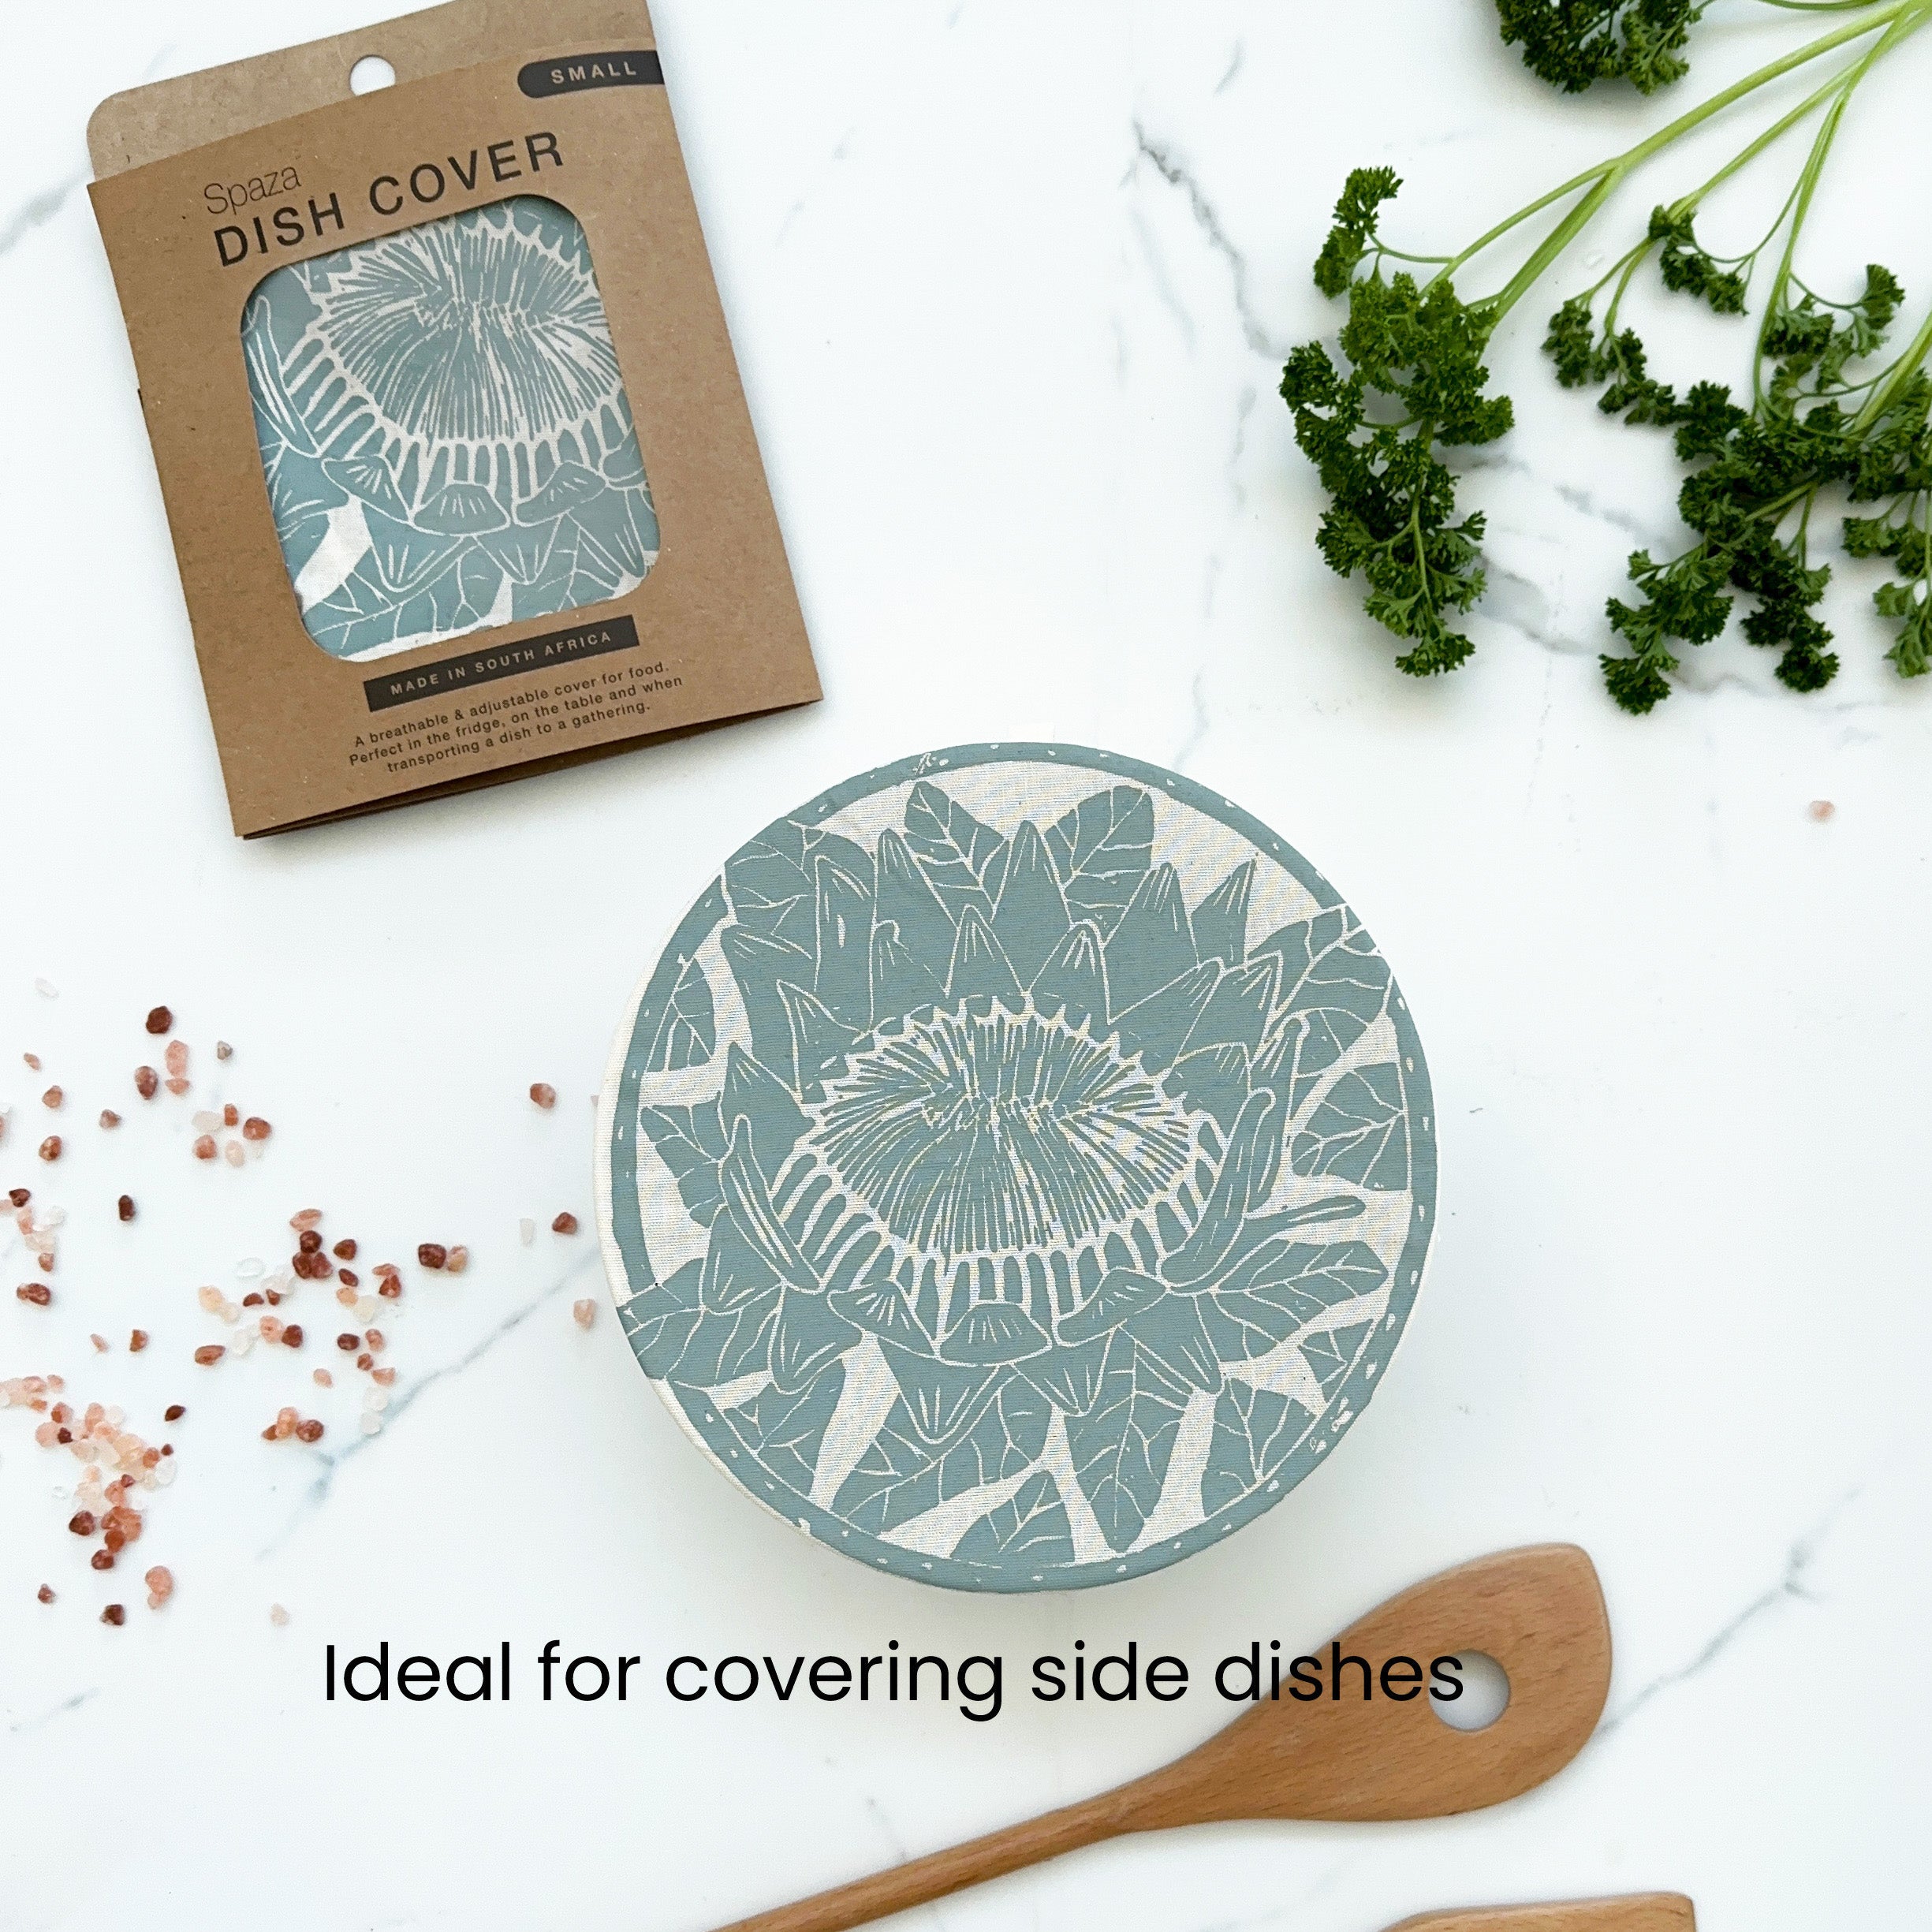 Dish and Bowl Cover Small Protea Print | handy single portion or leftover